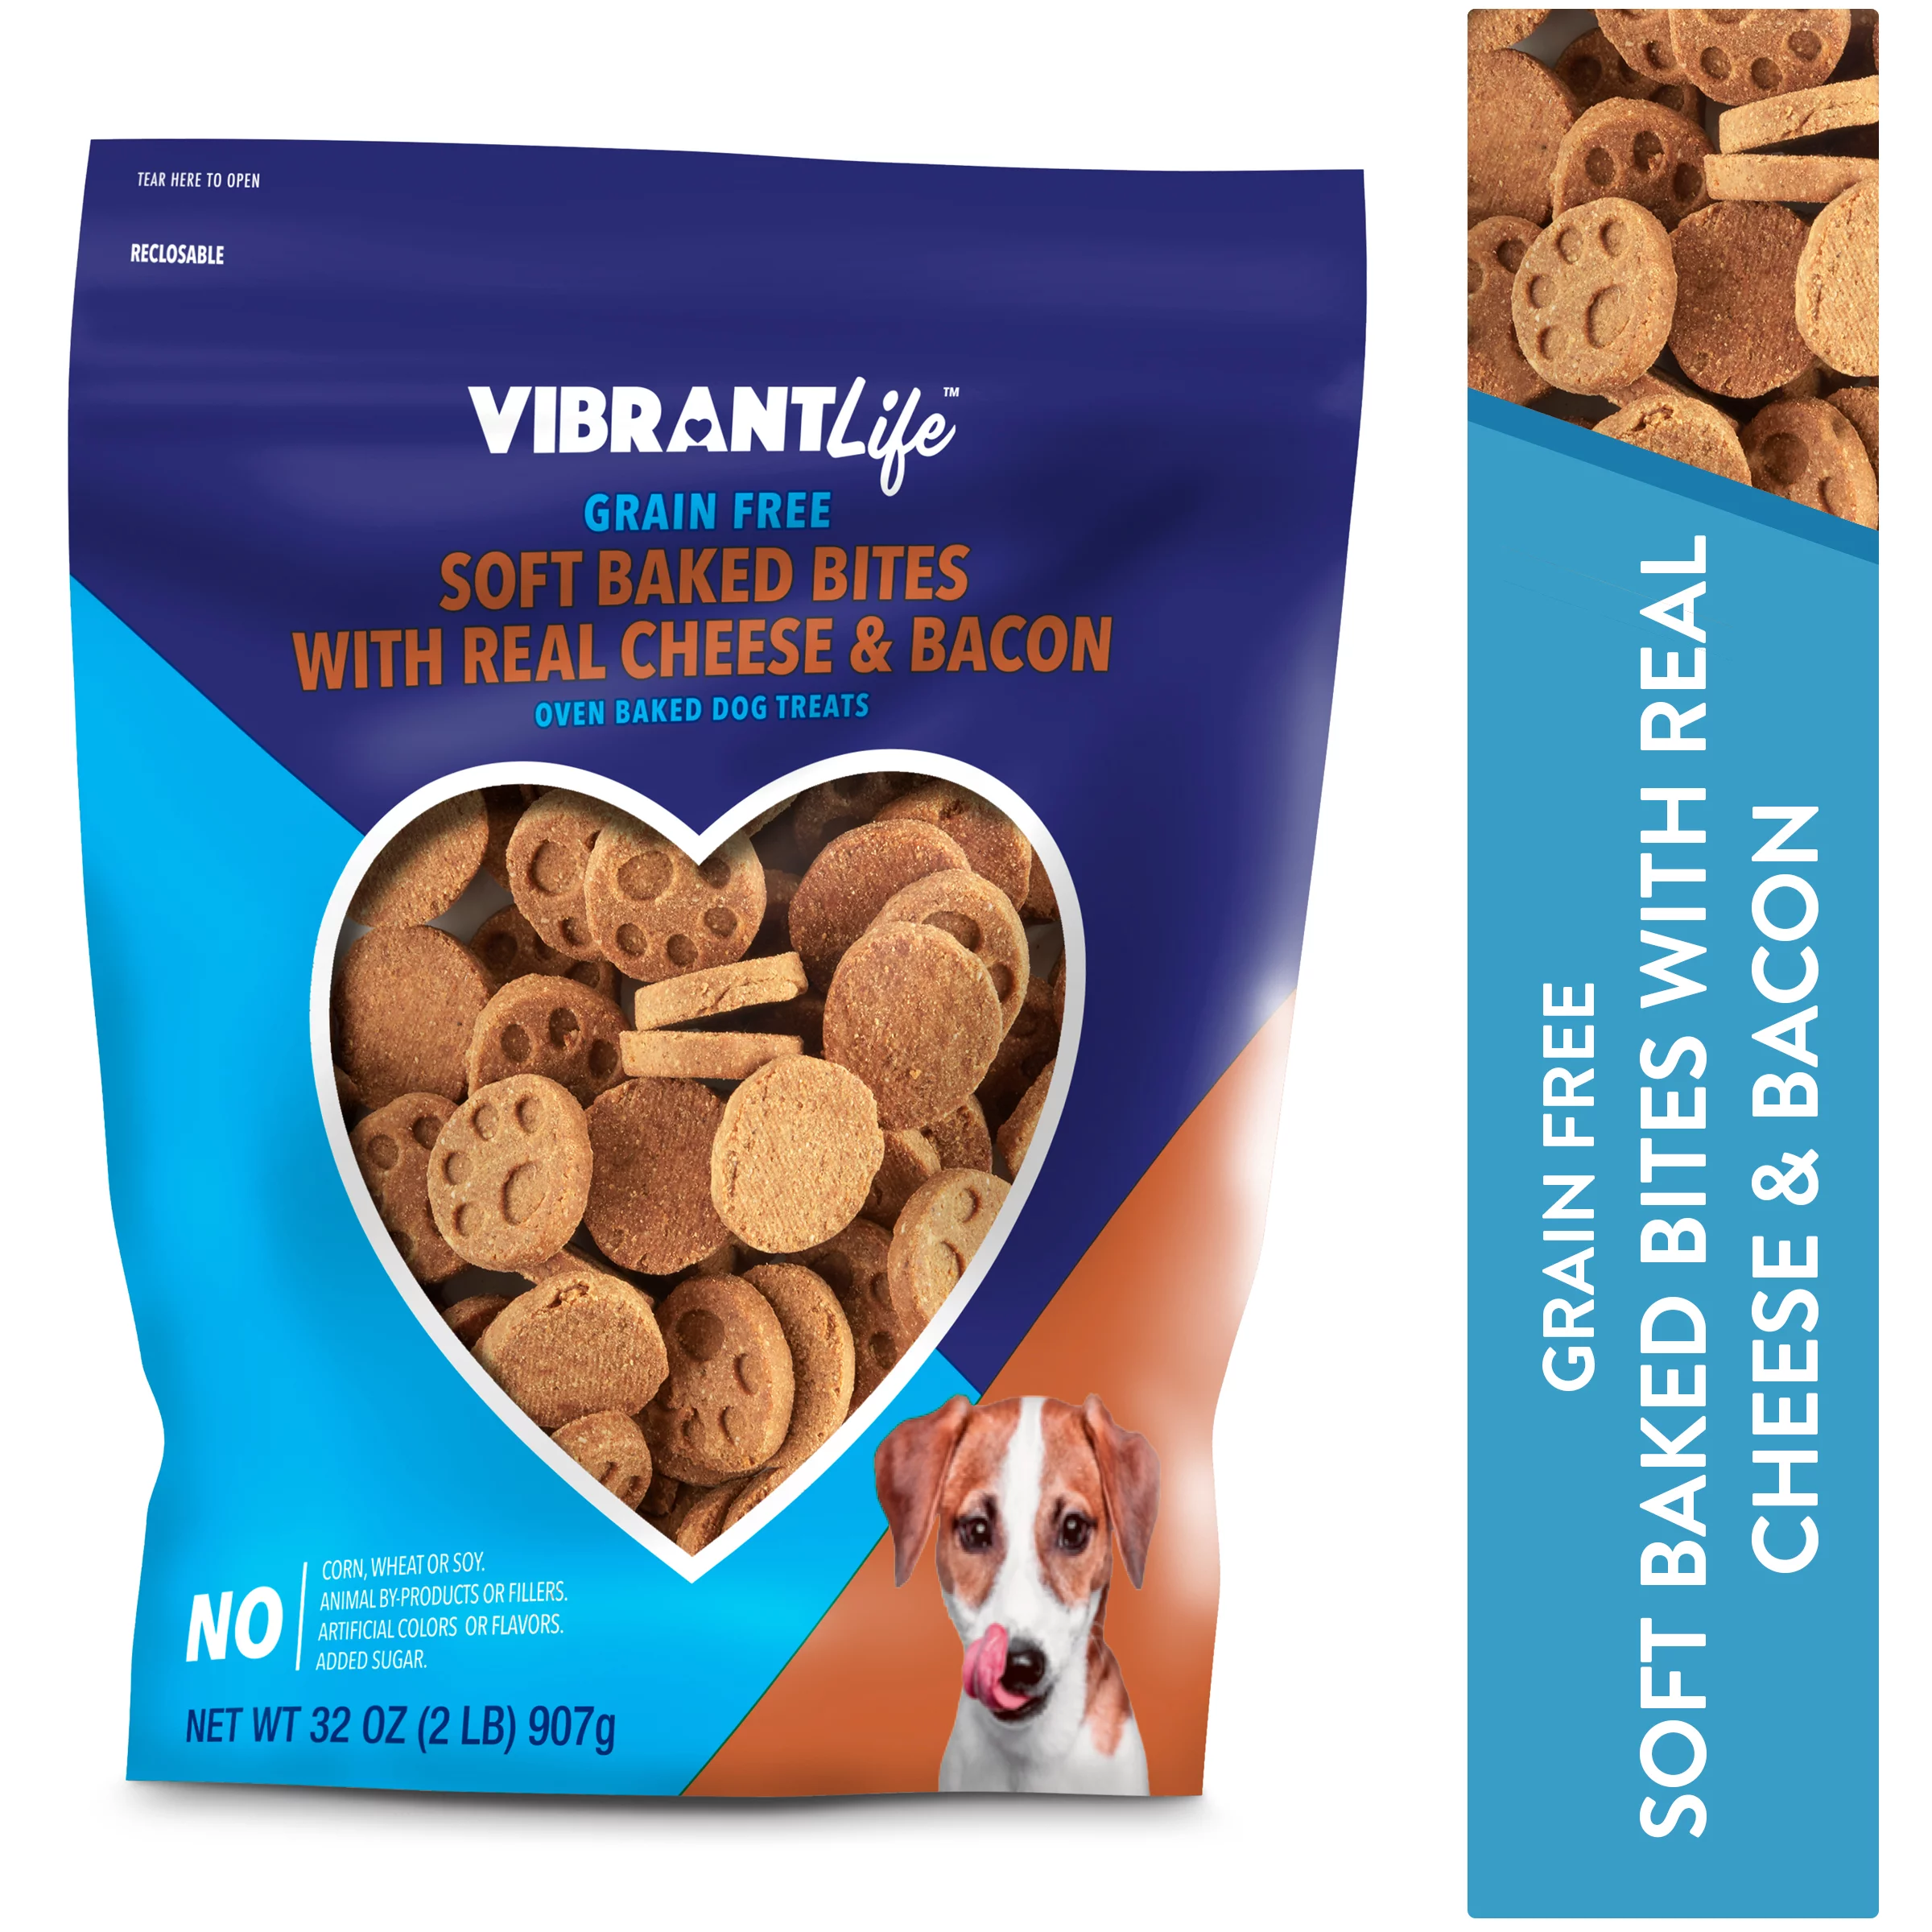 Vibrant Life Soft Baked Bites with Real Cheese & Bacon, 32 oz